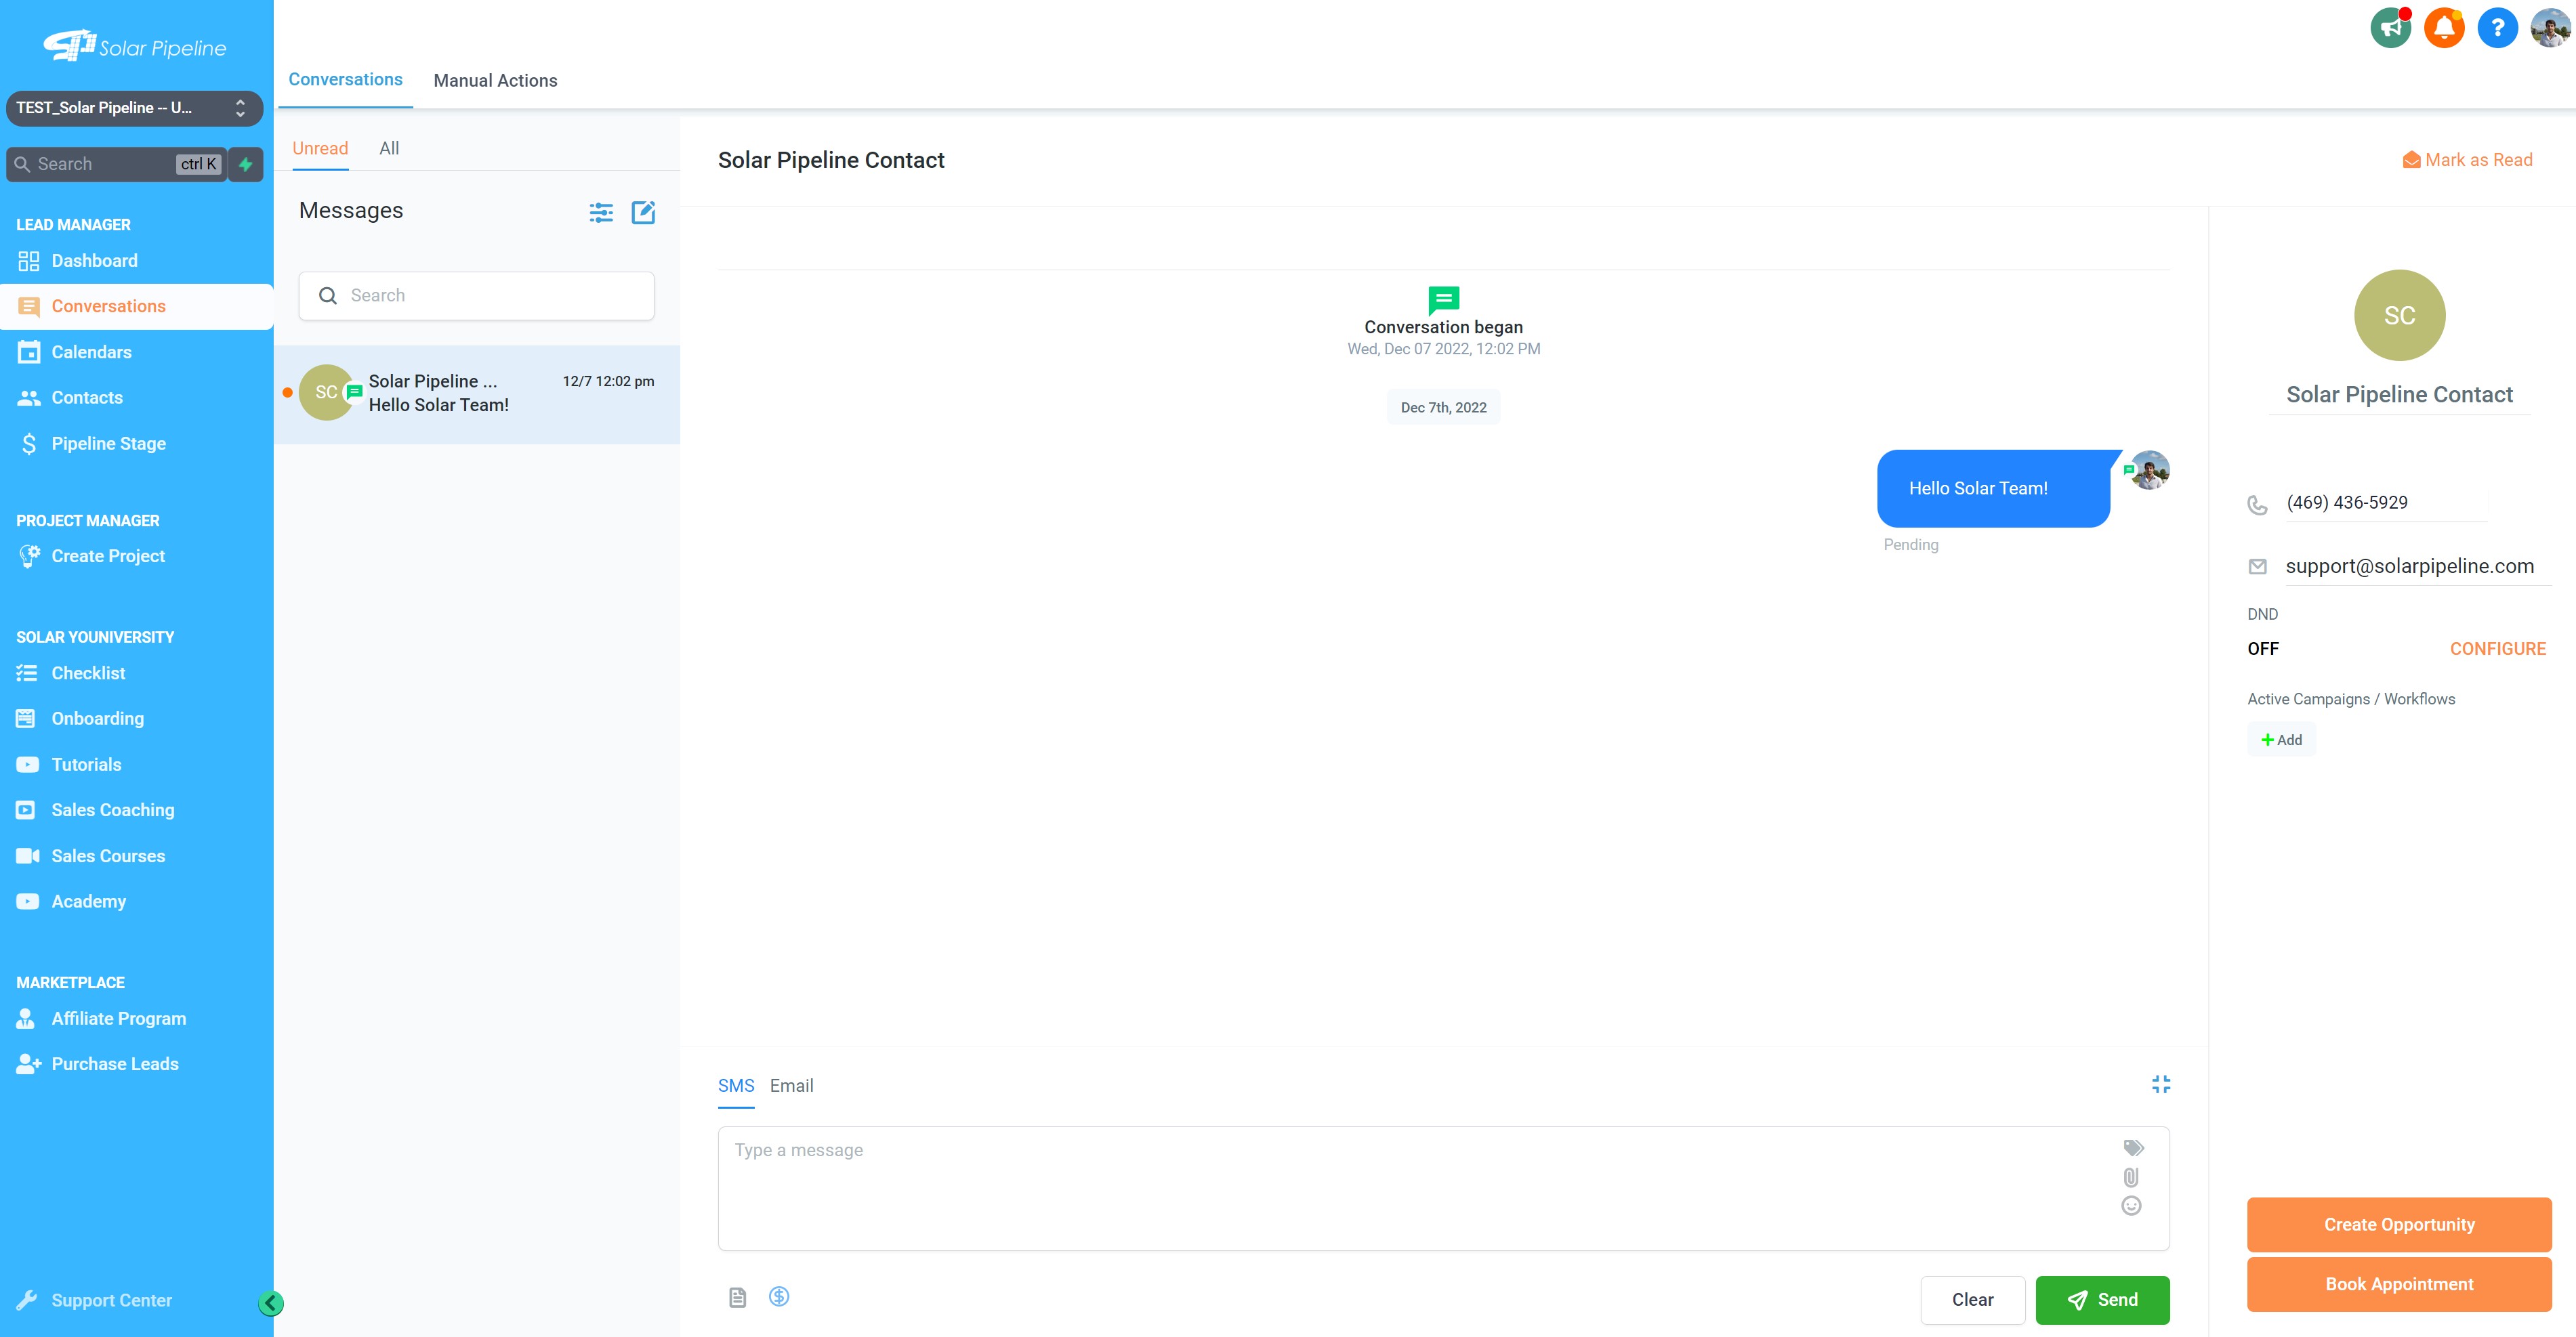 Manage all customer conversations in one place. Text, Email, call and respond to Social Media chats in just one page. Manage your team's conversations as well.